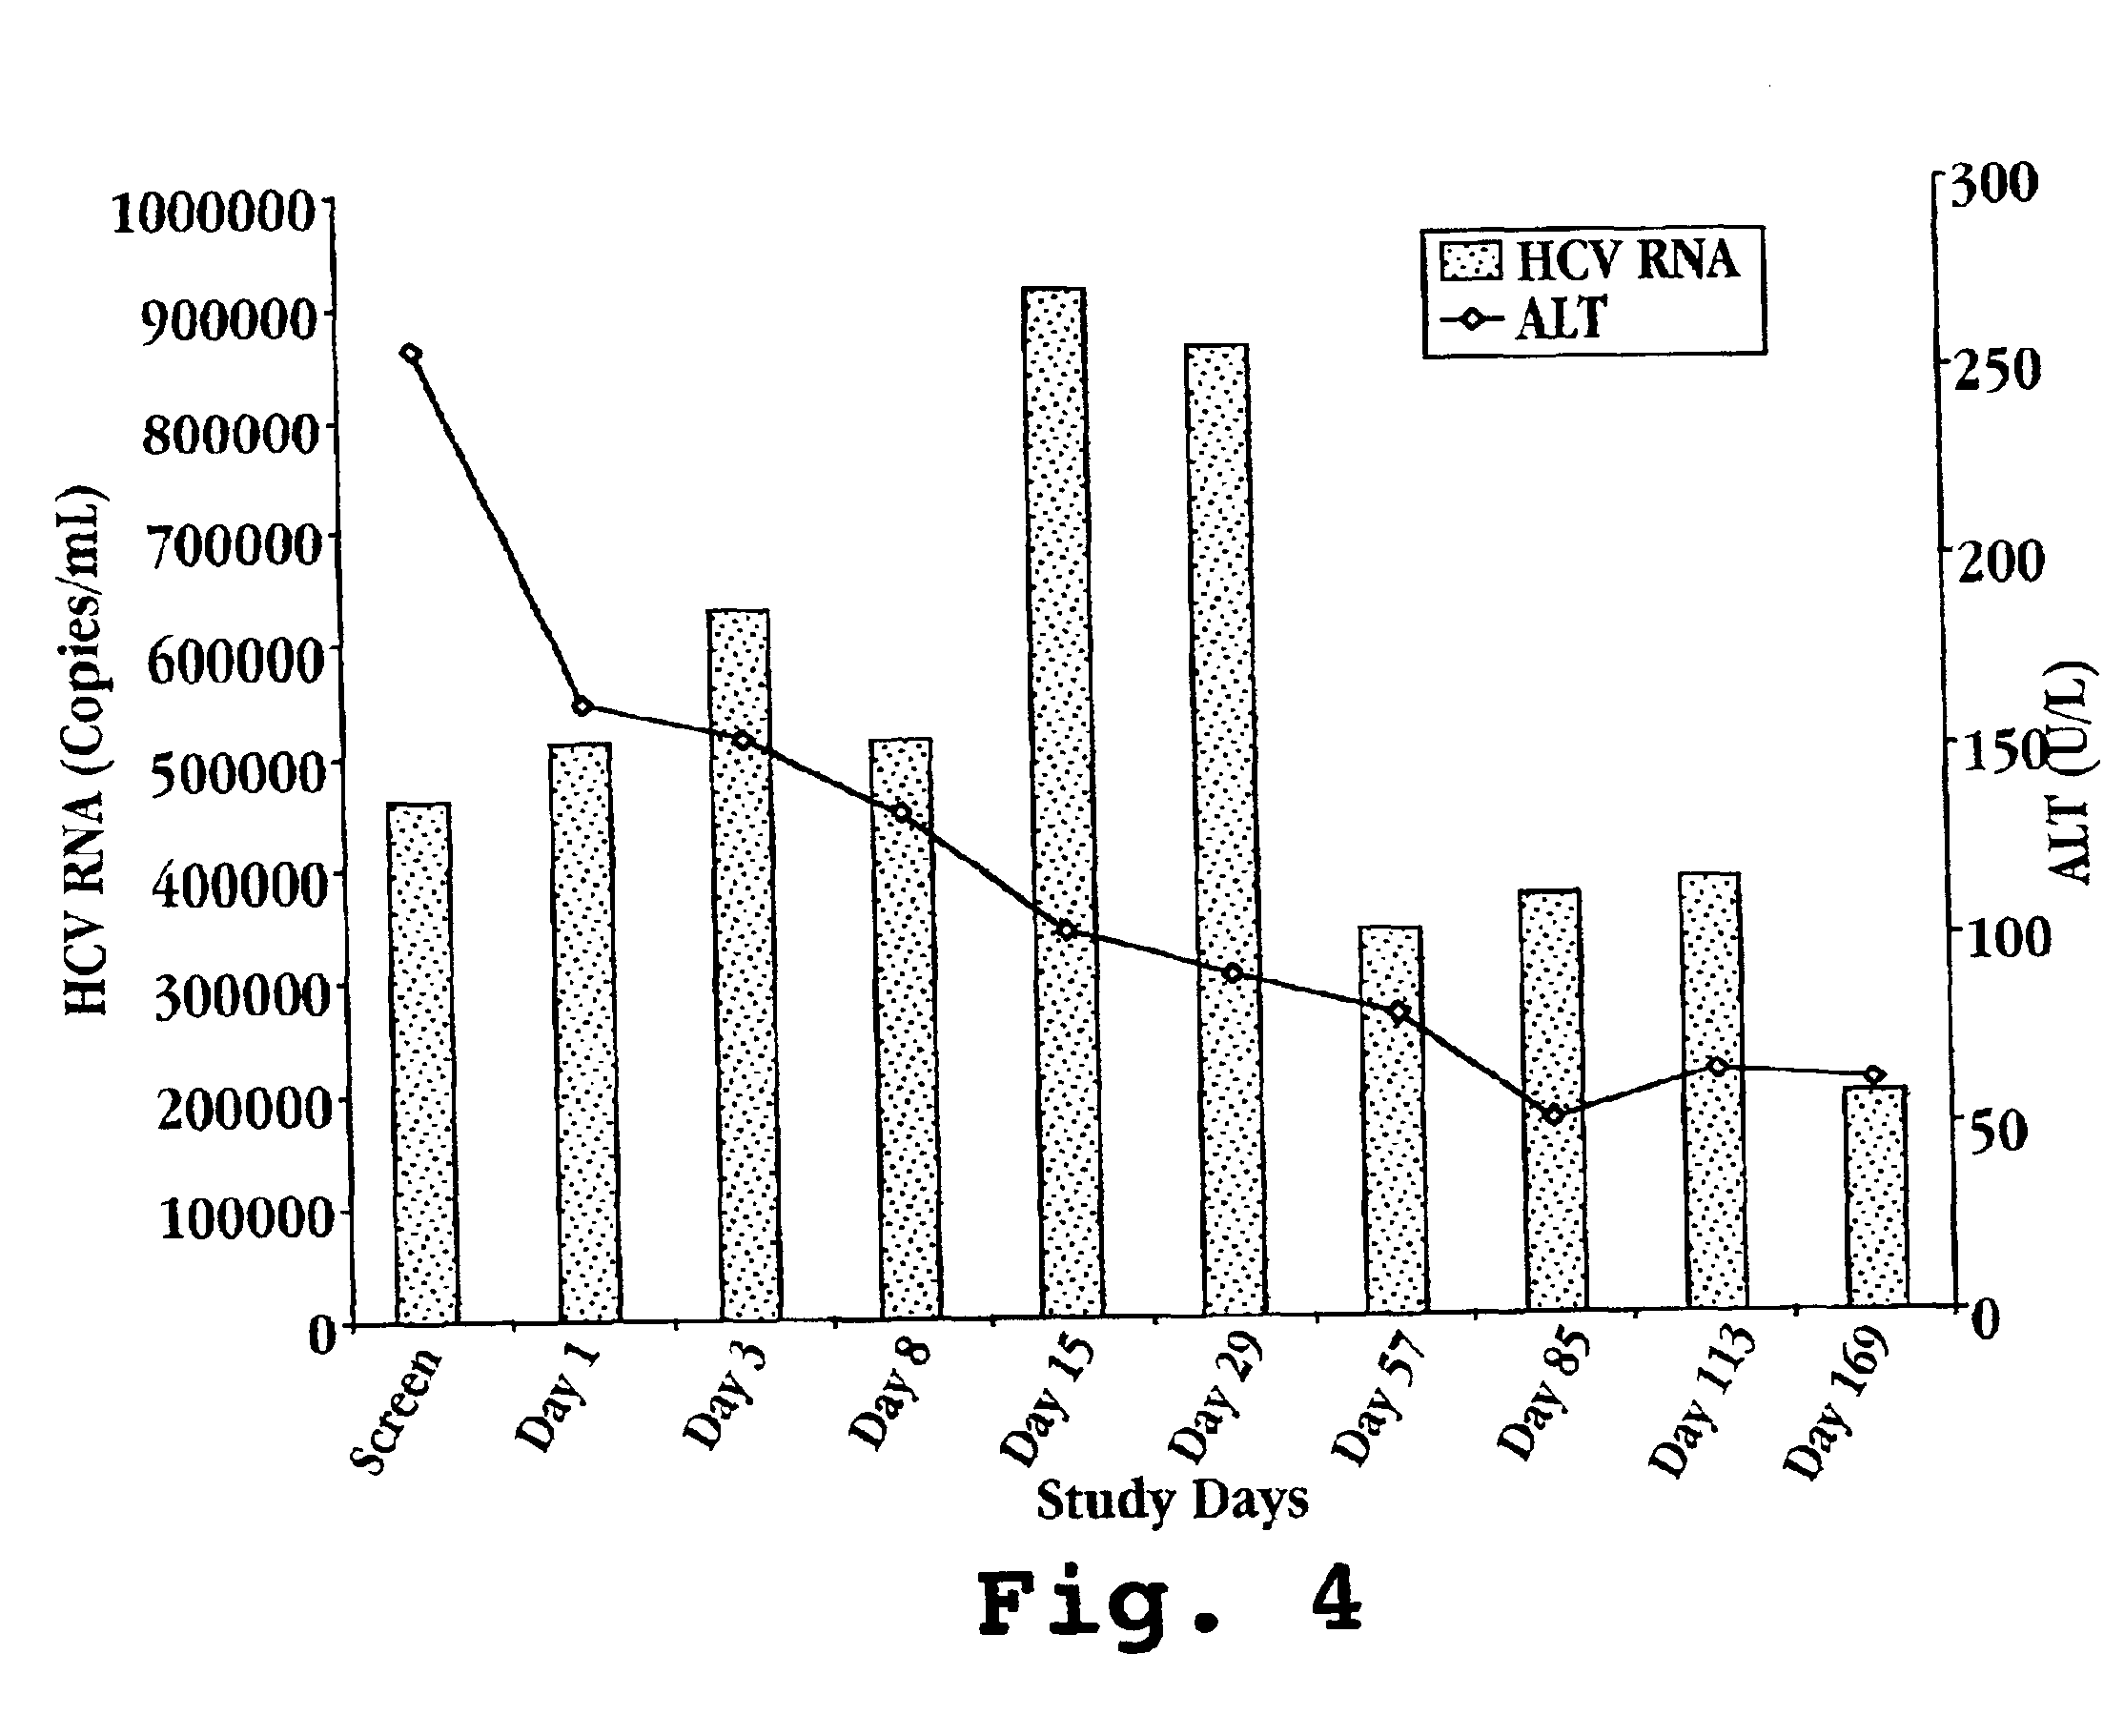 Composition for treatment of and method of monitoring hepatitis C virus using interferon-TAU